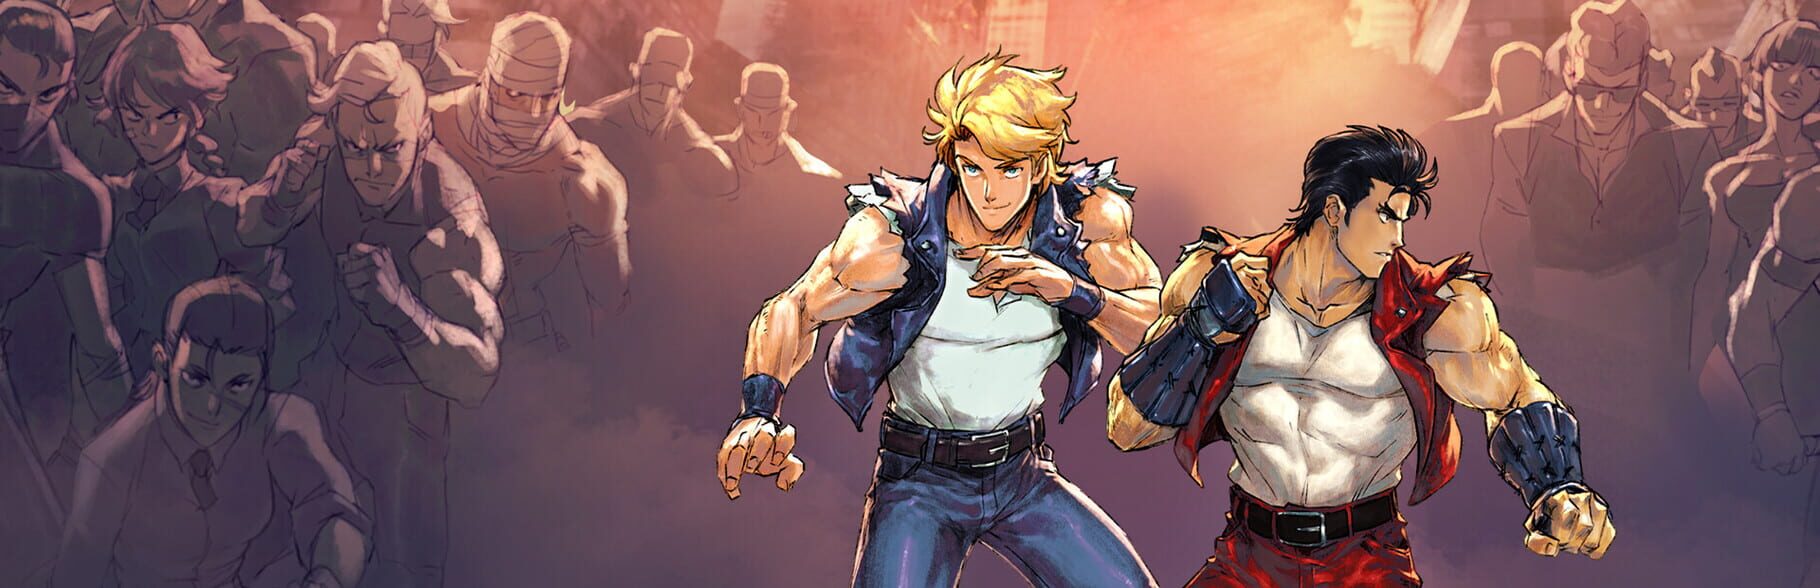 Artwork for Double Dragon Gaiden: Rise of the Dragons